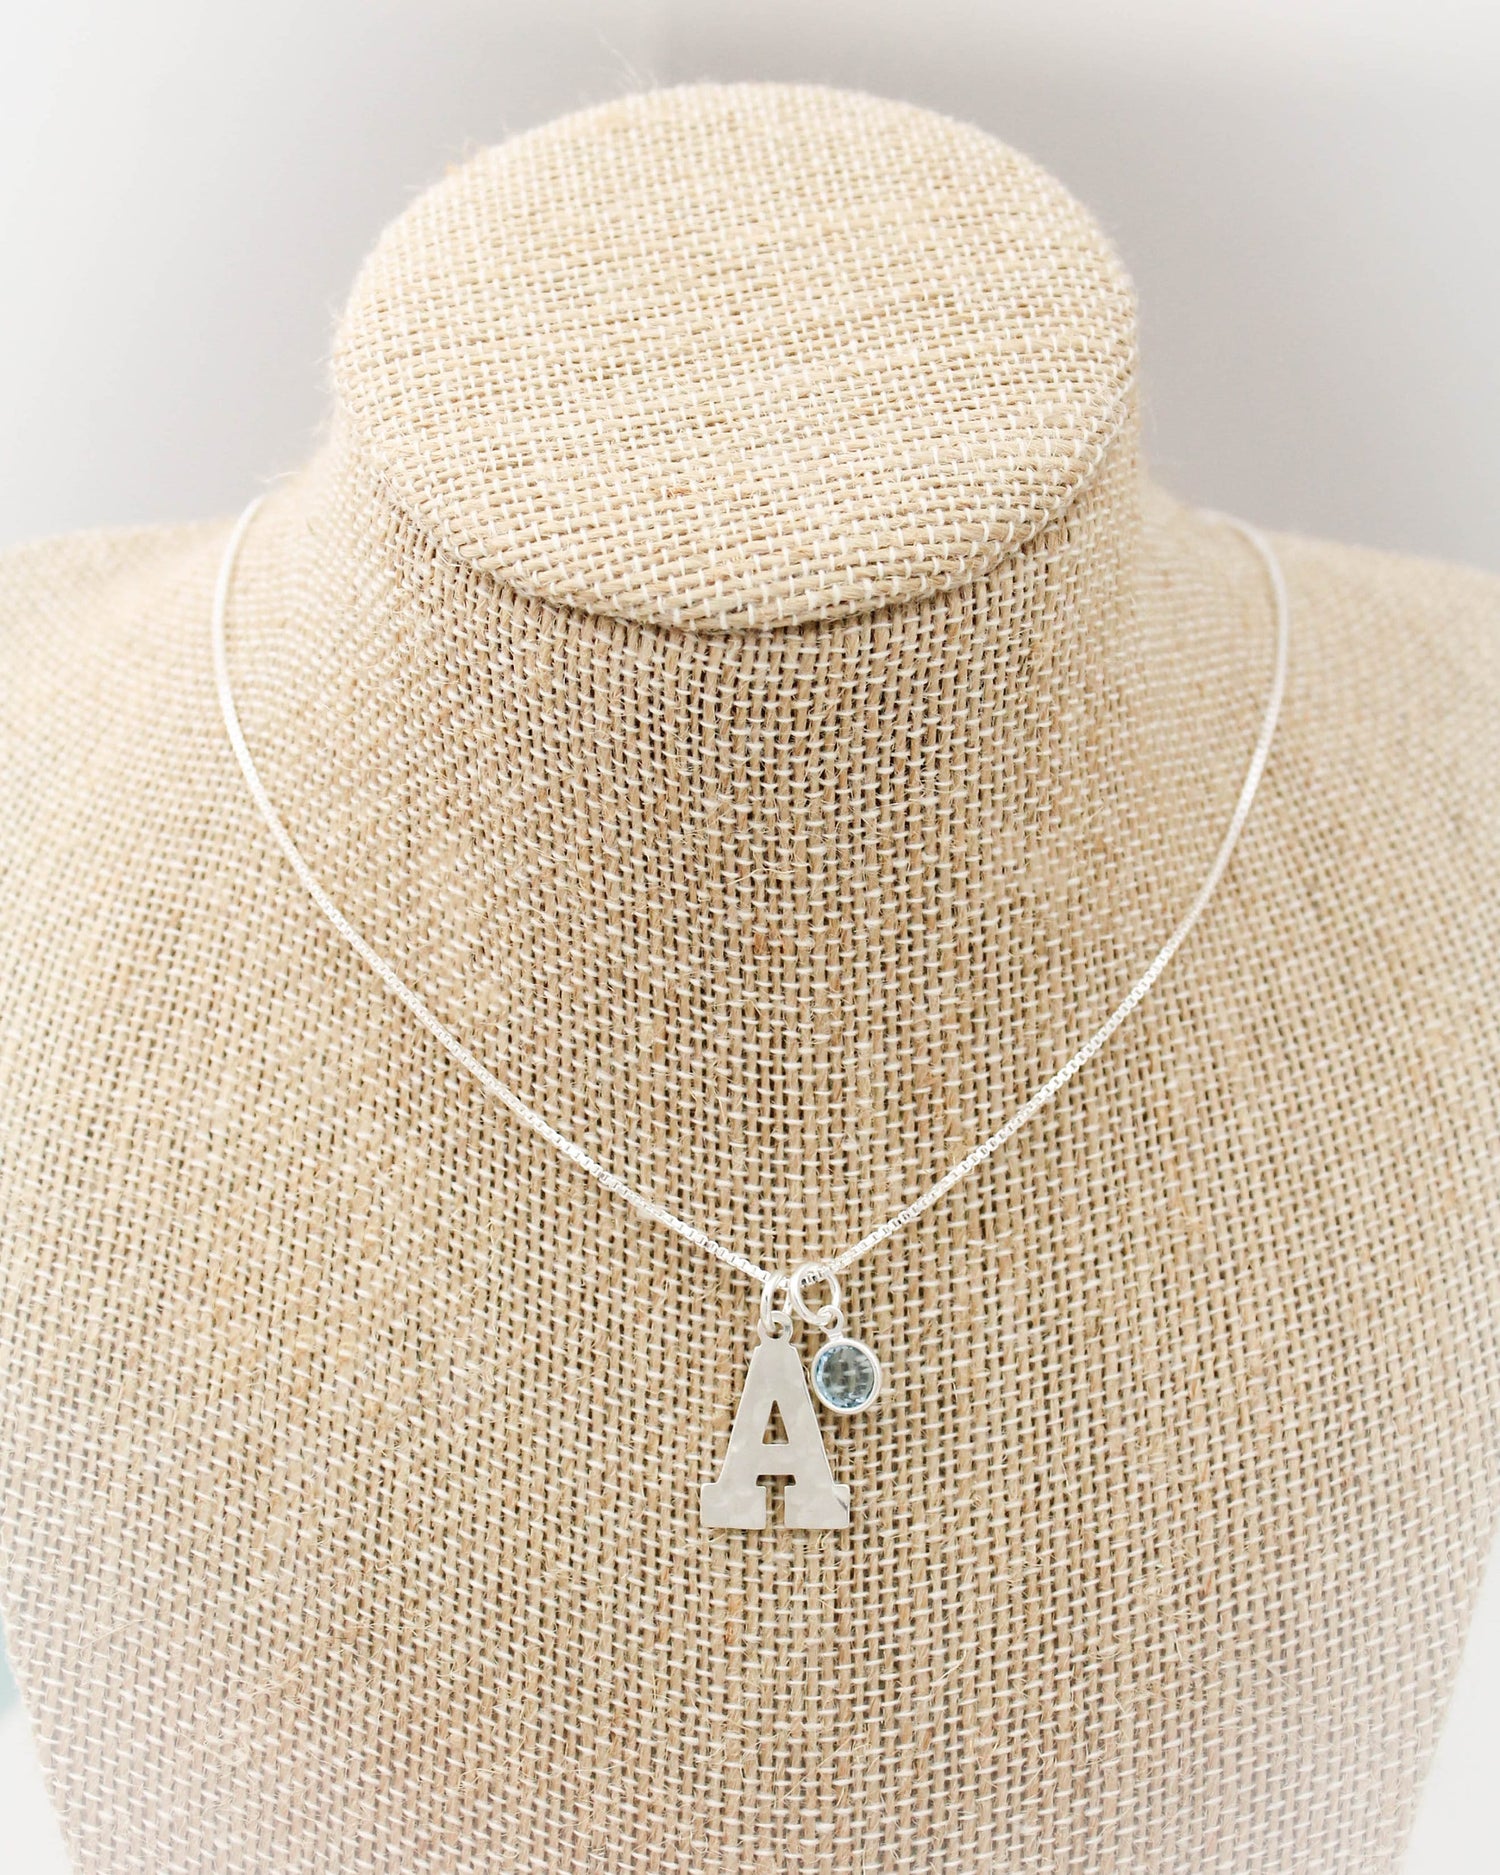 Initial Necklace in Sterling Silver with Birthstone, Birthstone Birthday Gift, Personalized Gift, Initial Jewelry Gift, March Birthstone